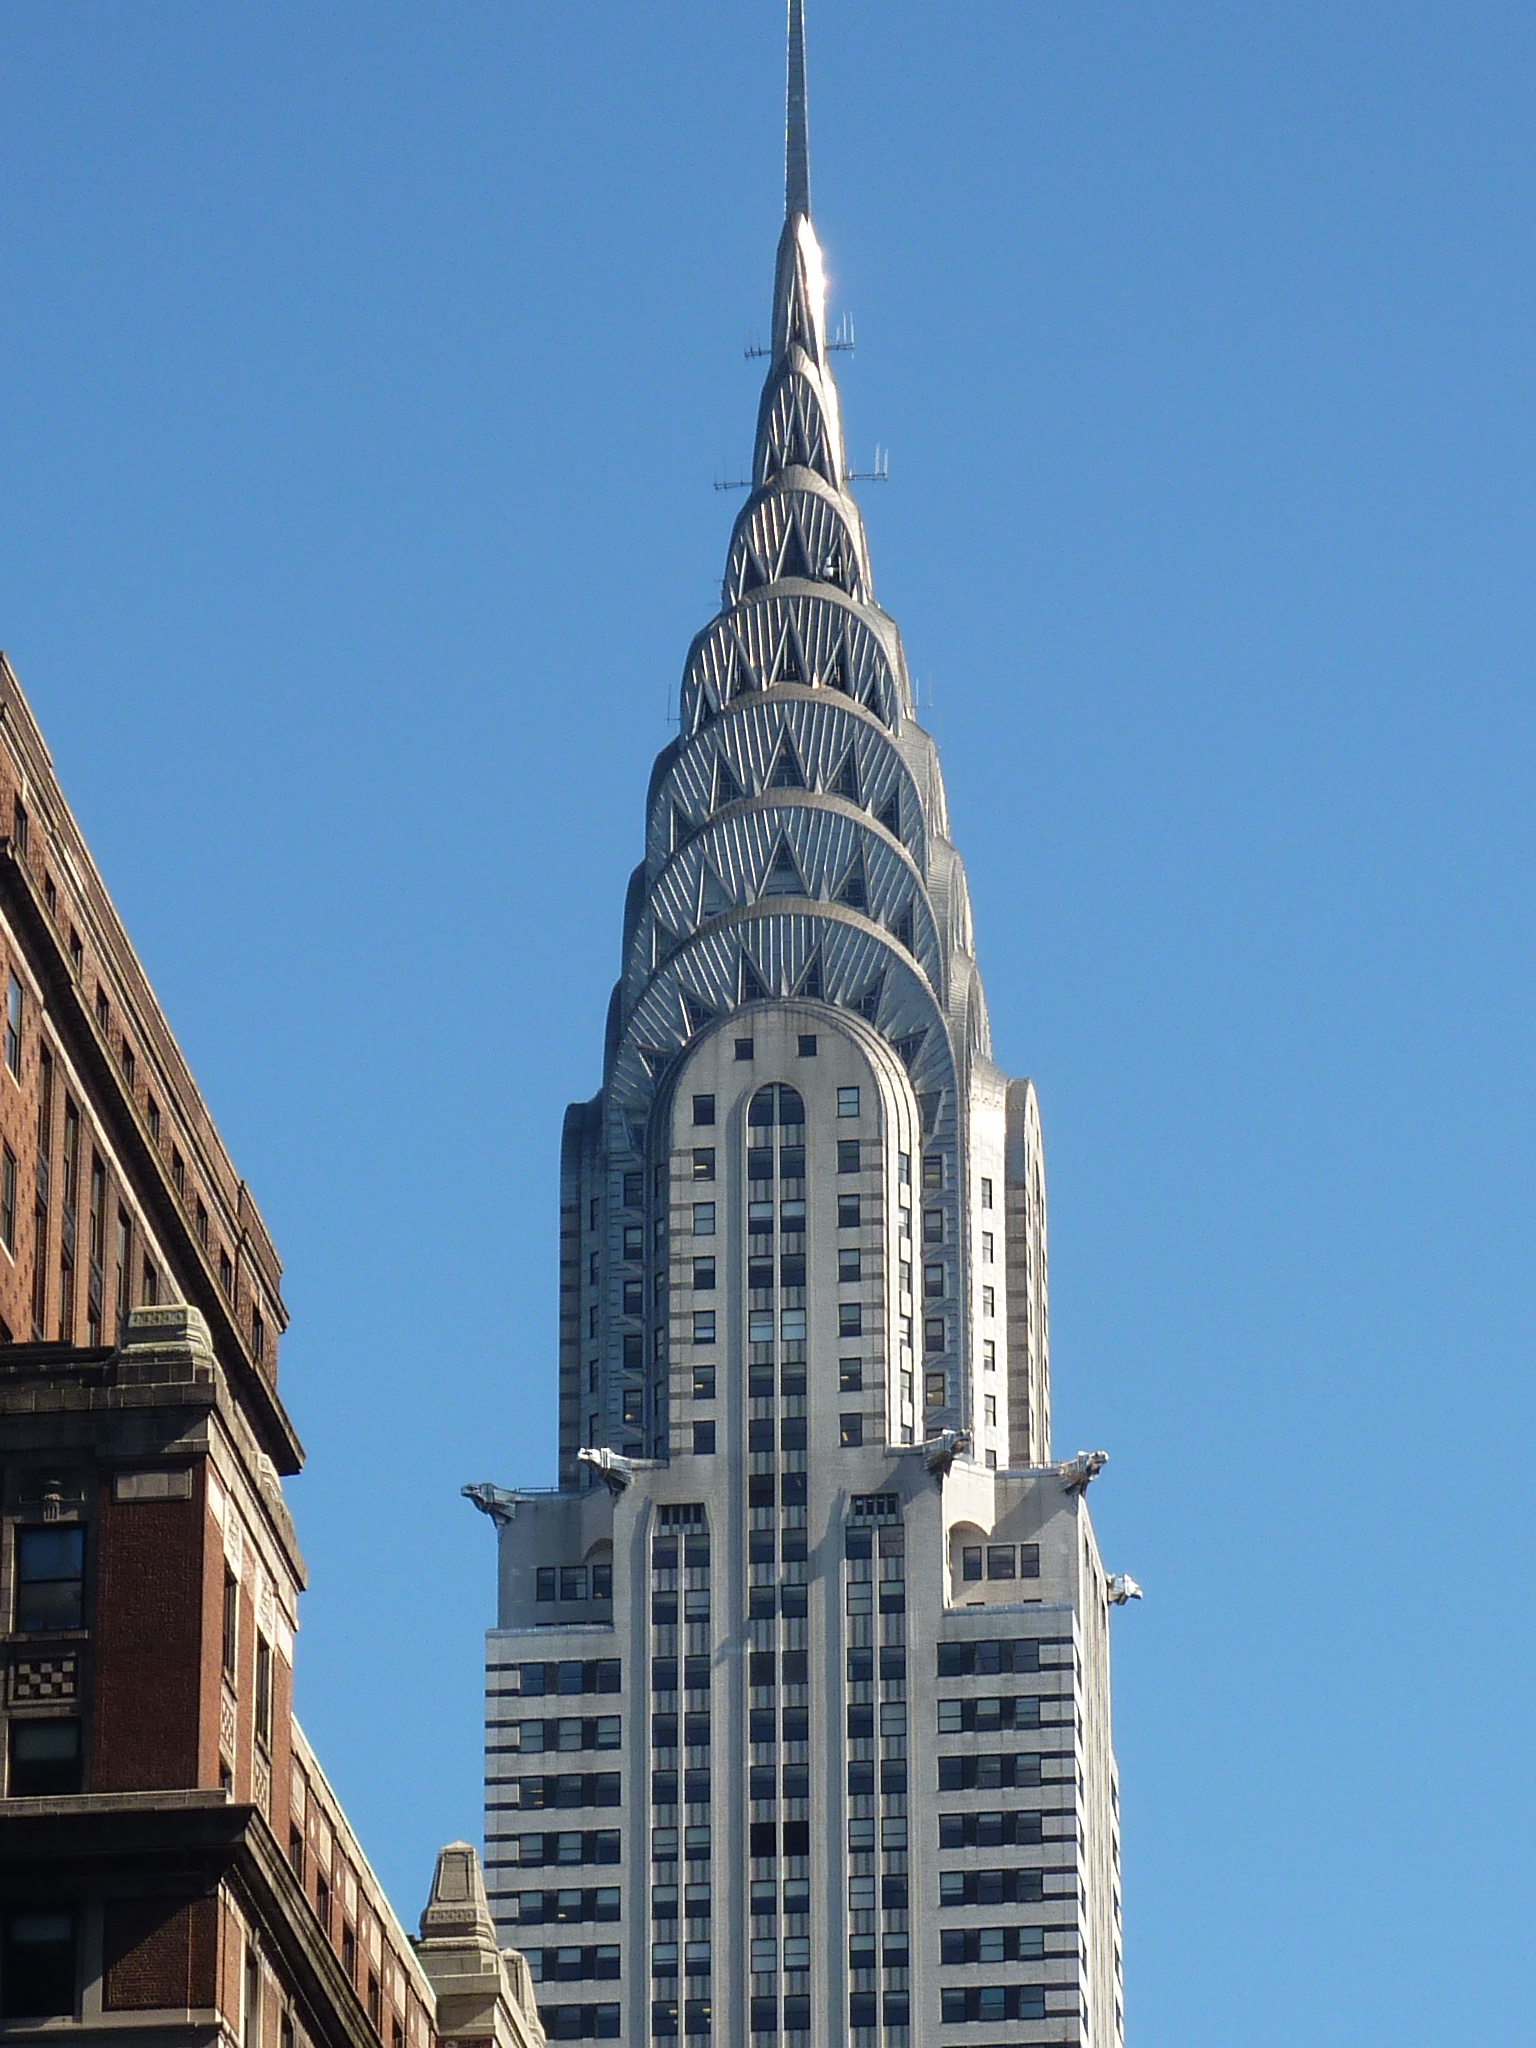 Chrysler Building: A skyscraper located in New York City and constructed between 1928 and 1930. 1540x2050 HD Wallpaper.